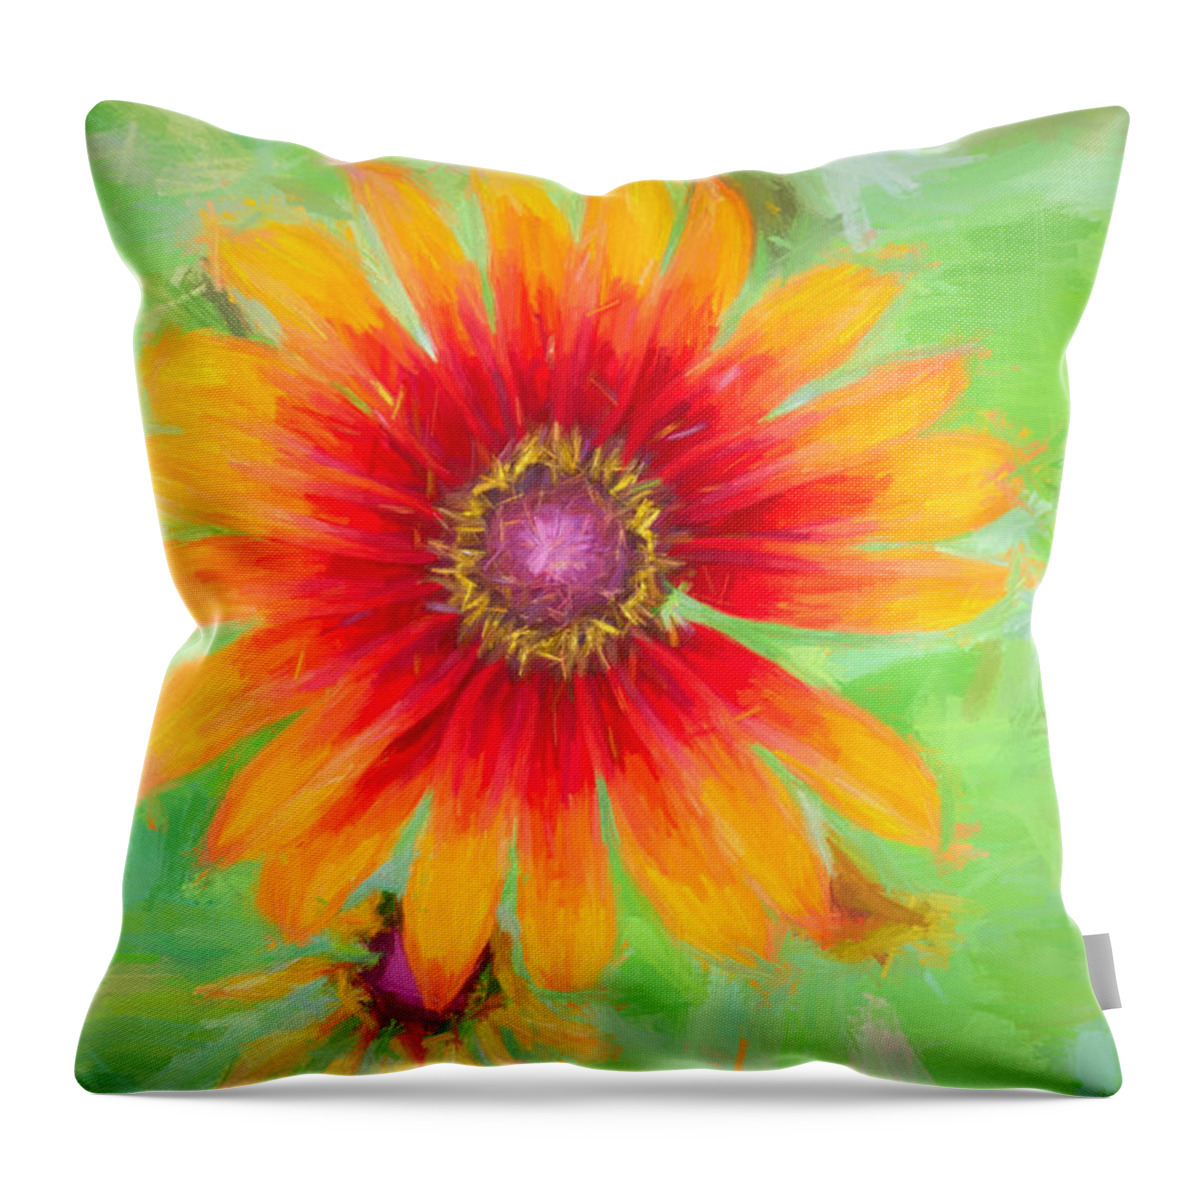 Flower Throw Pillow featuring the photograph Rudbeckia by Kathy Bassett